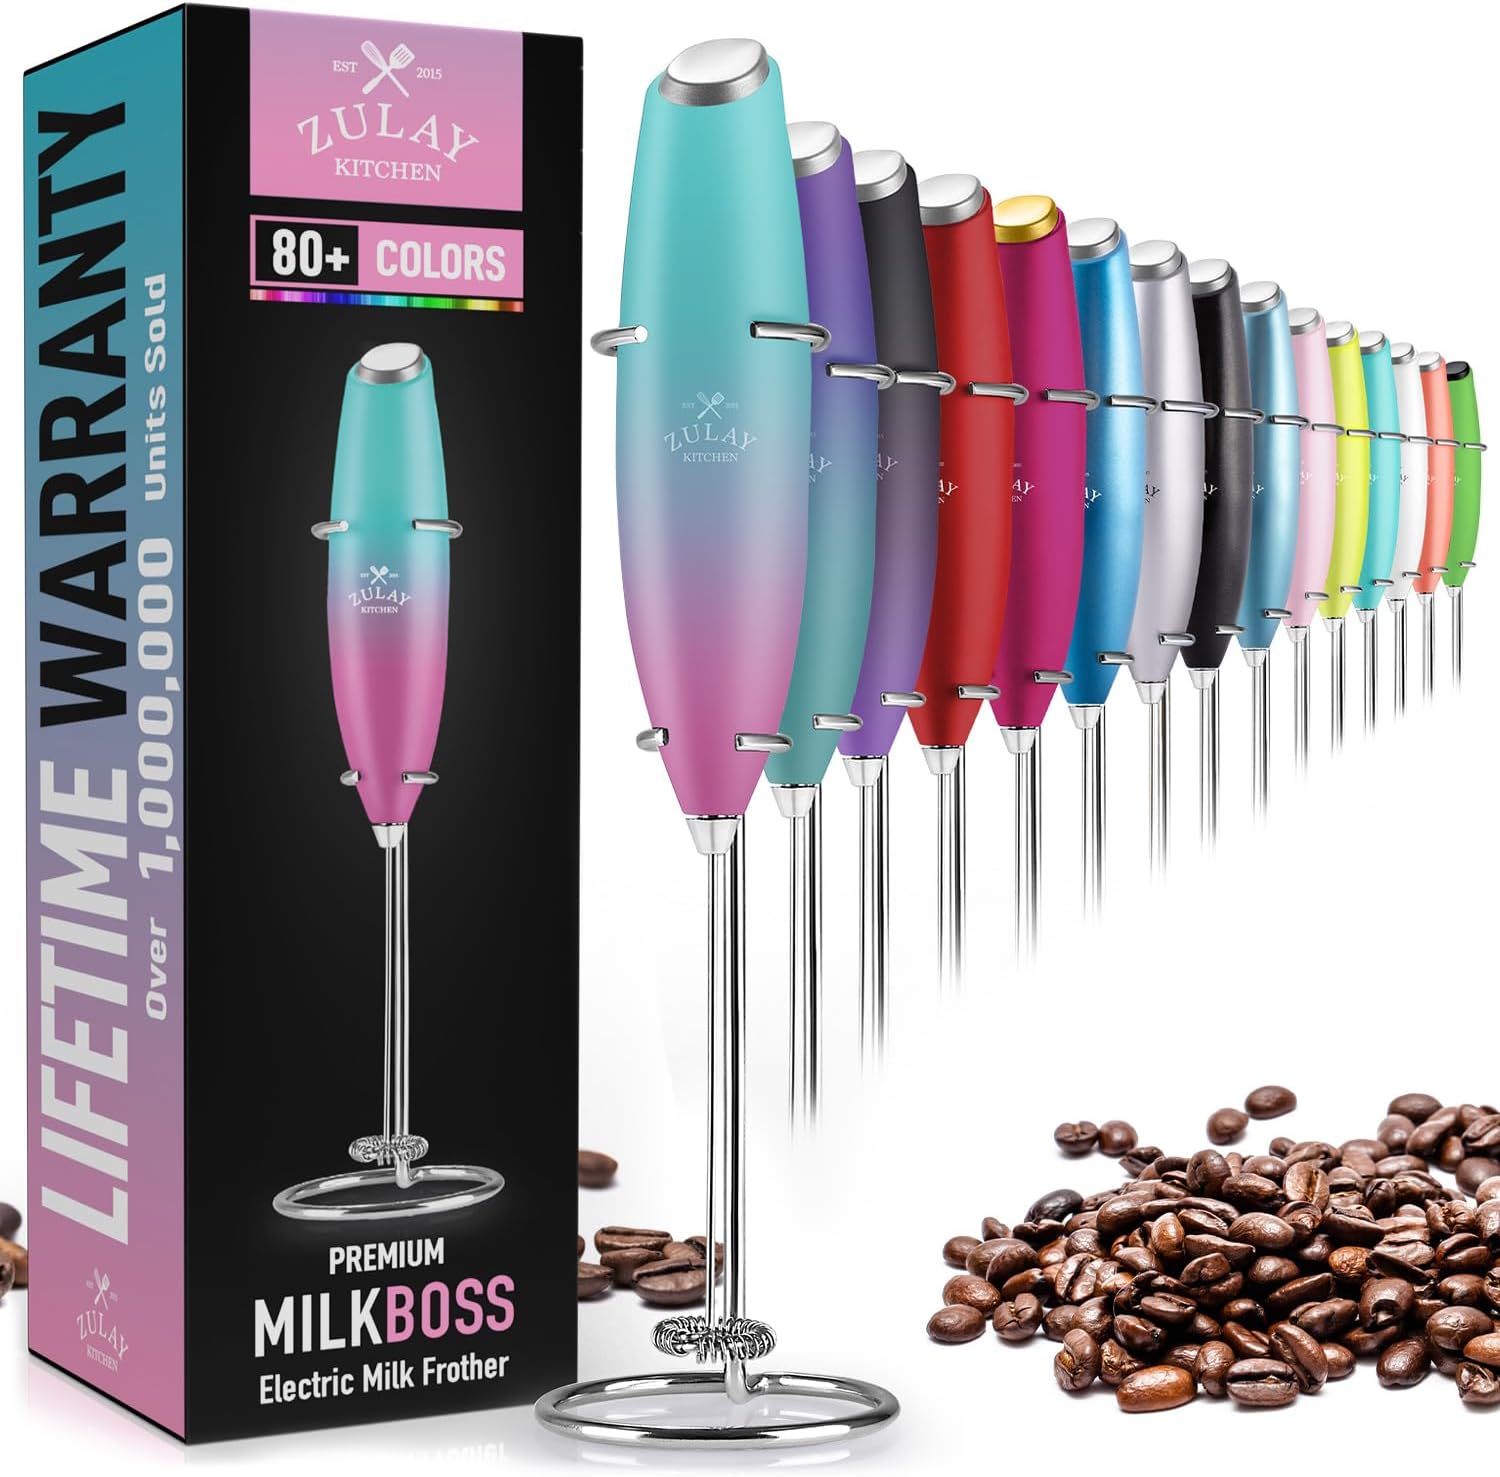 Milk Boss (Batteries Included) Milk Frother